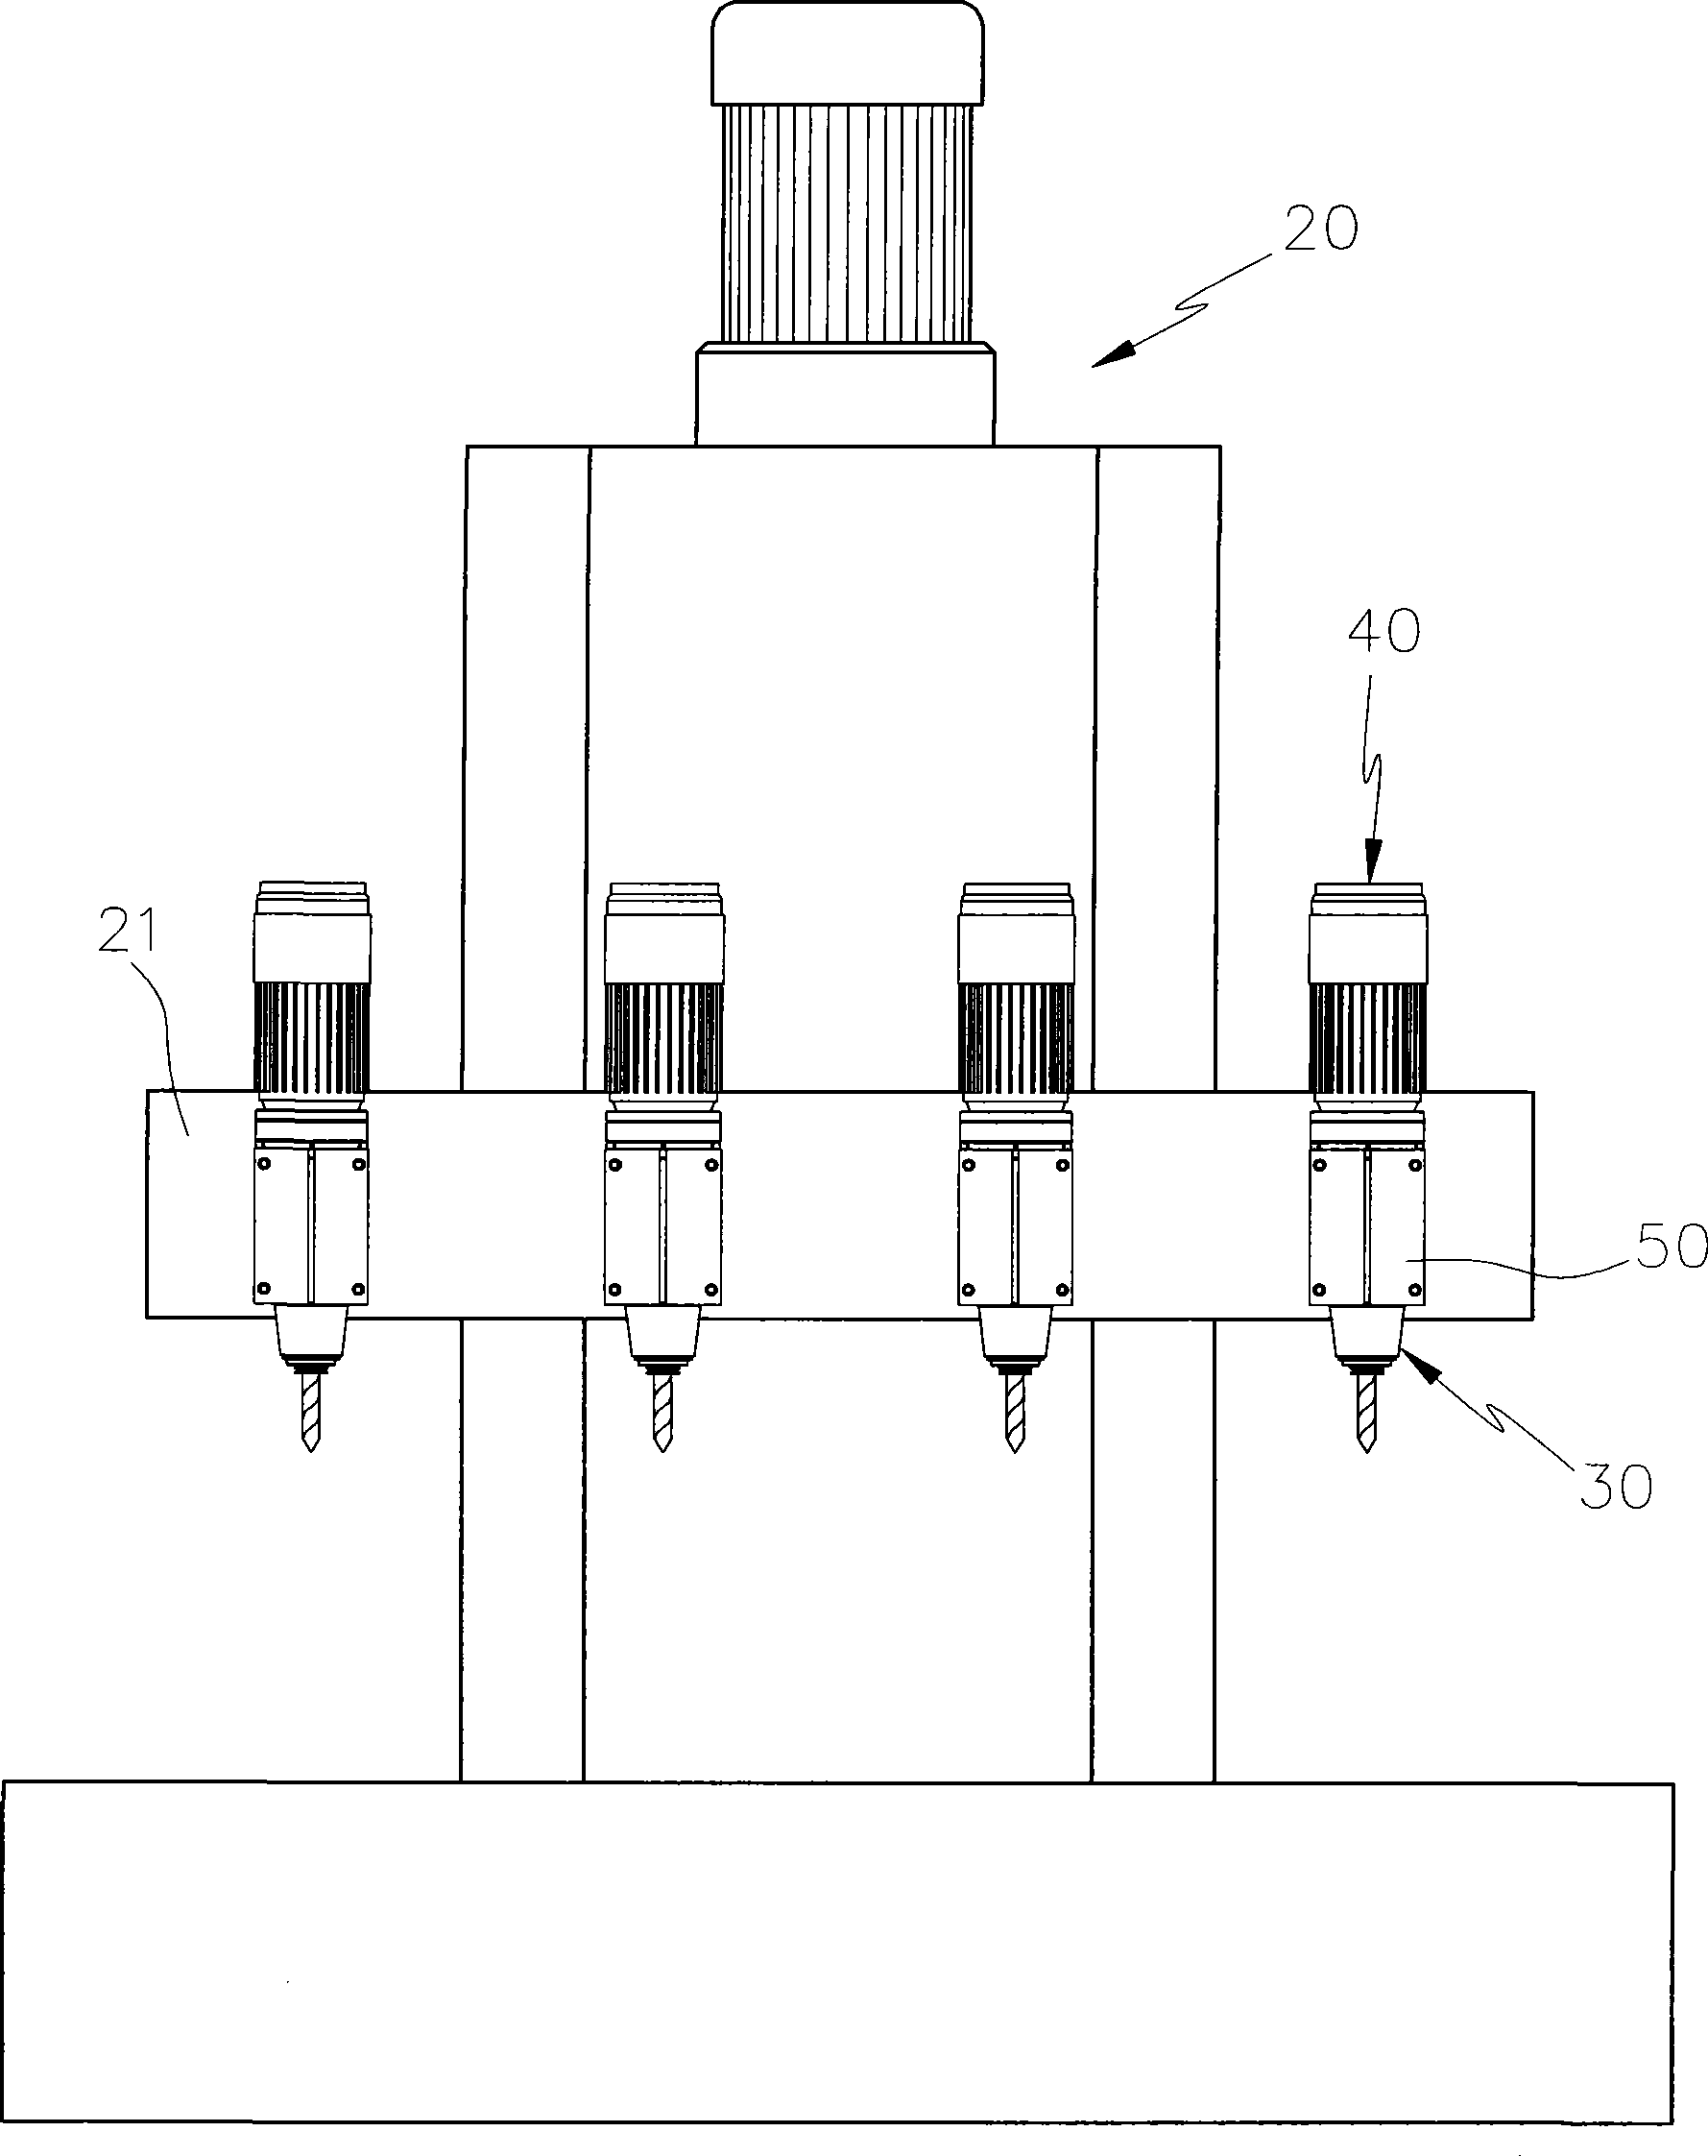 Direct-connecting main spindle for multiple-spindle processor